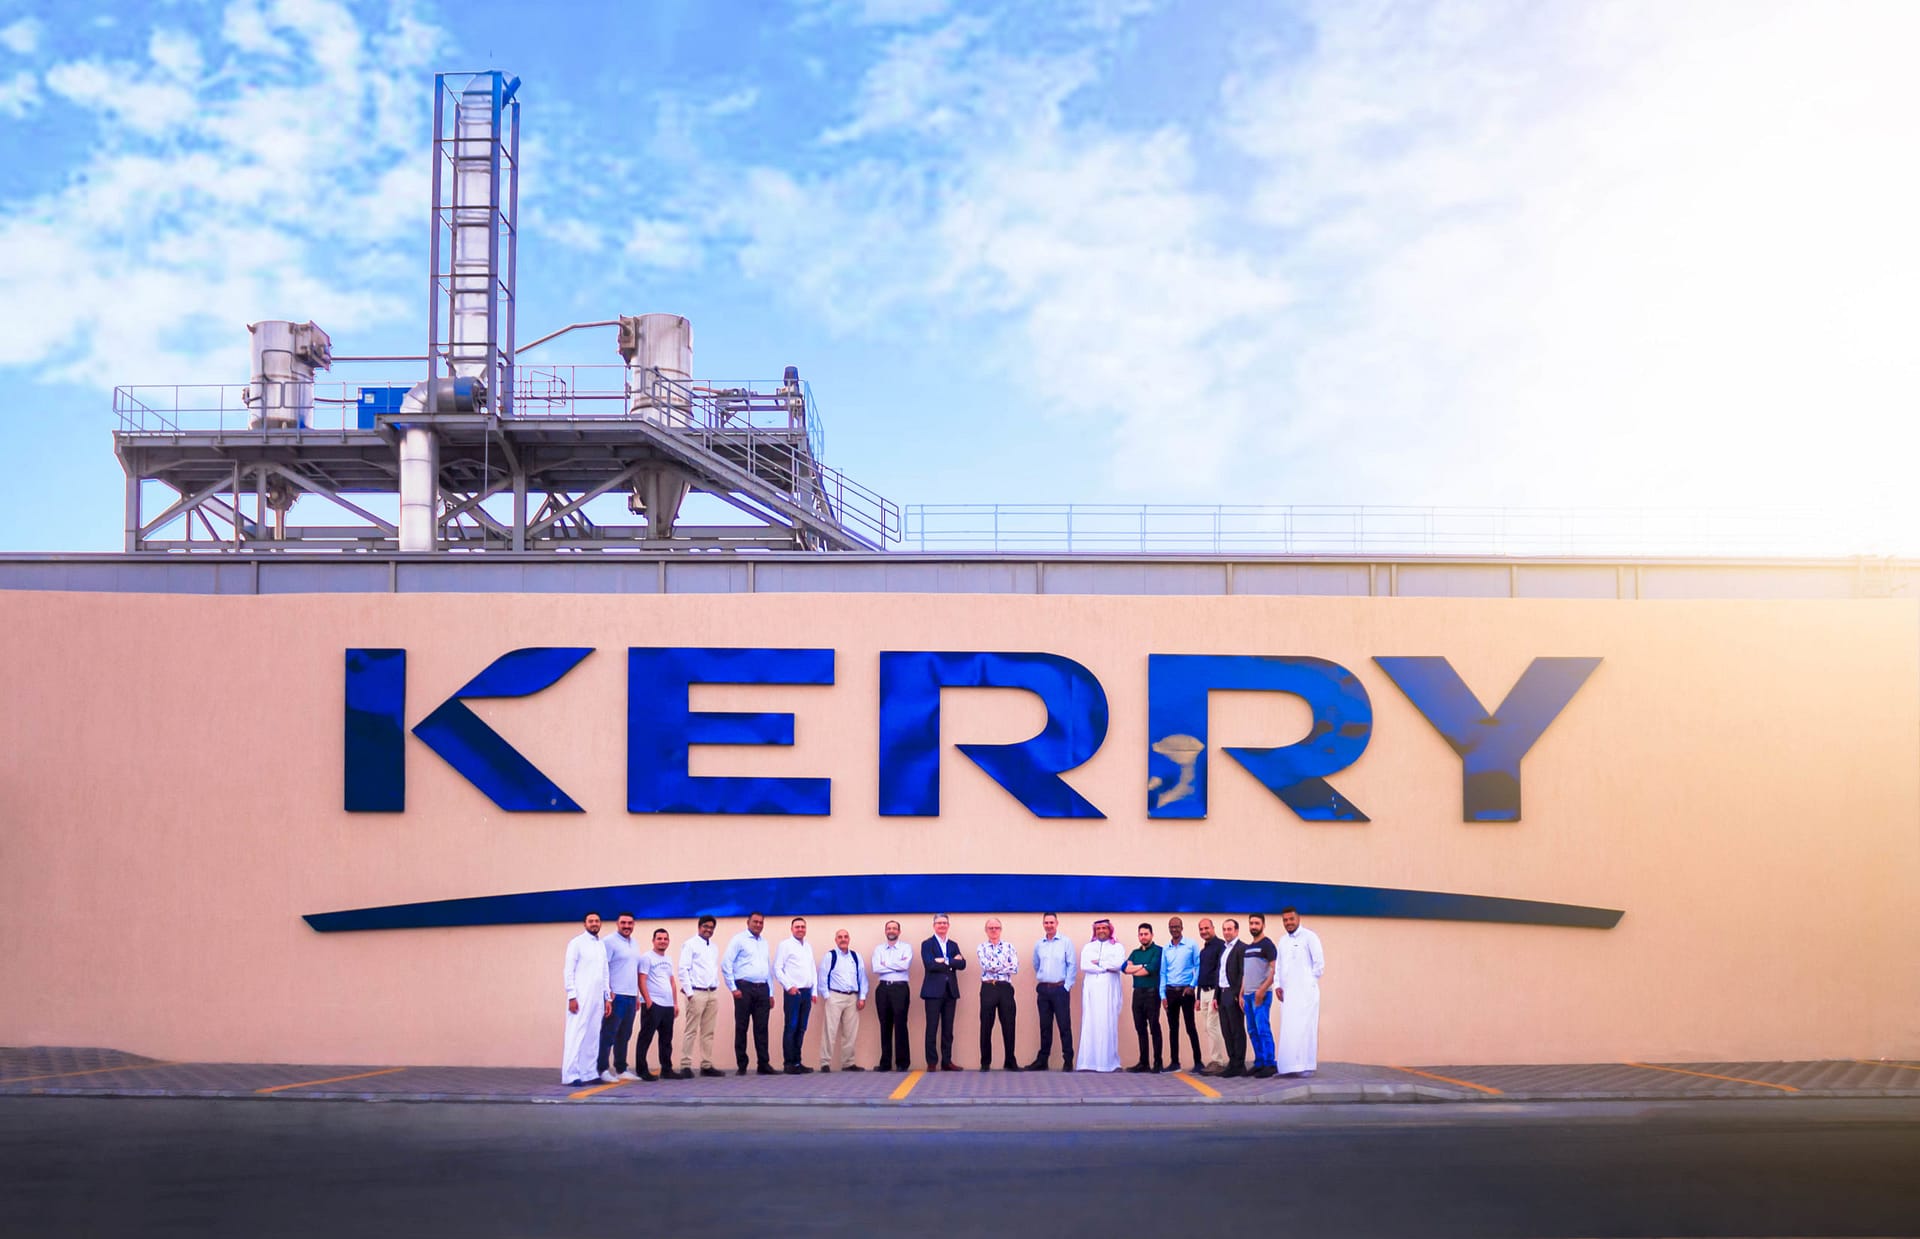 Kerry expands presence in Middle East with the opening of a new facility in Saudi Arabia 